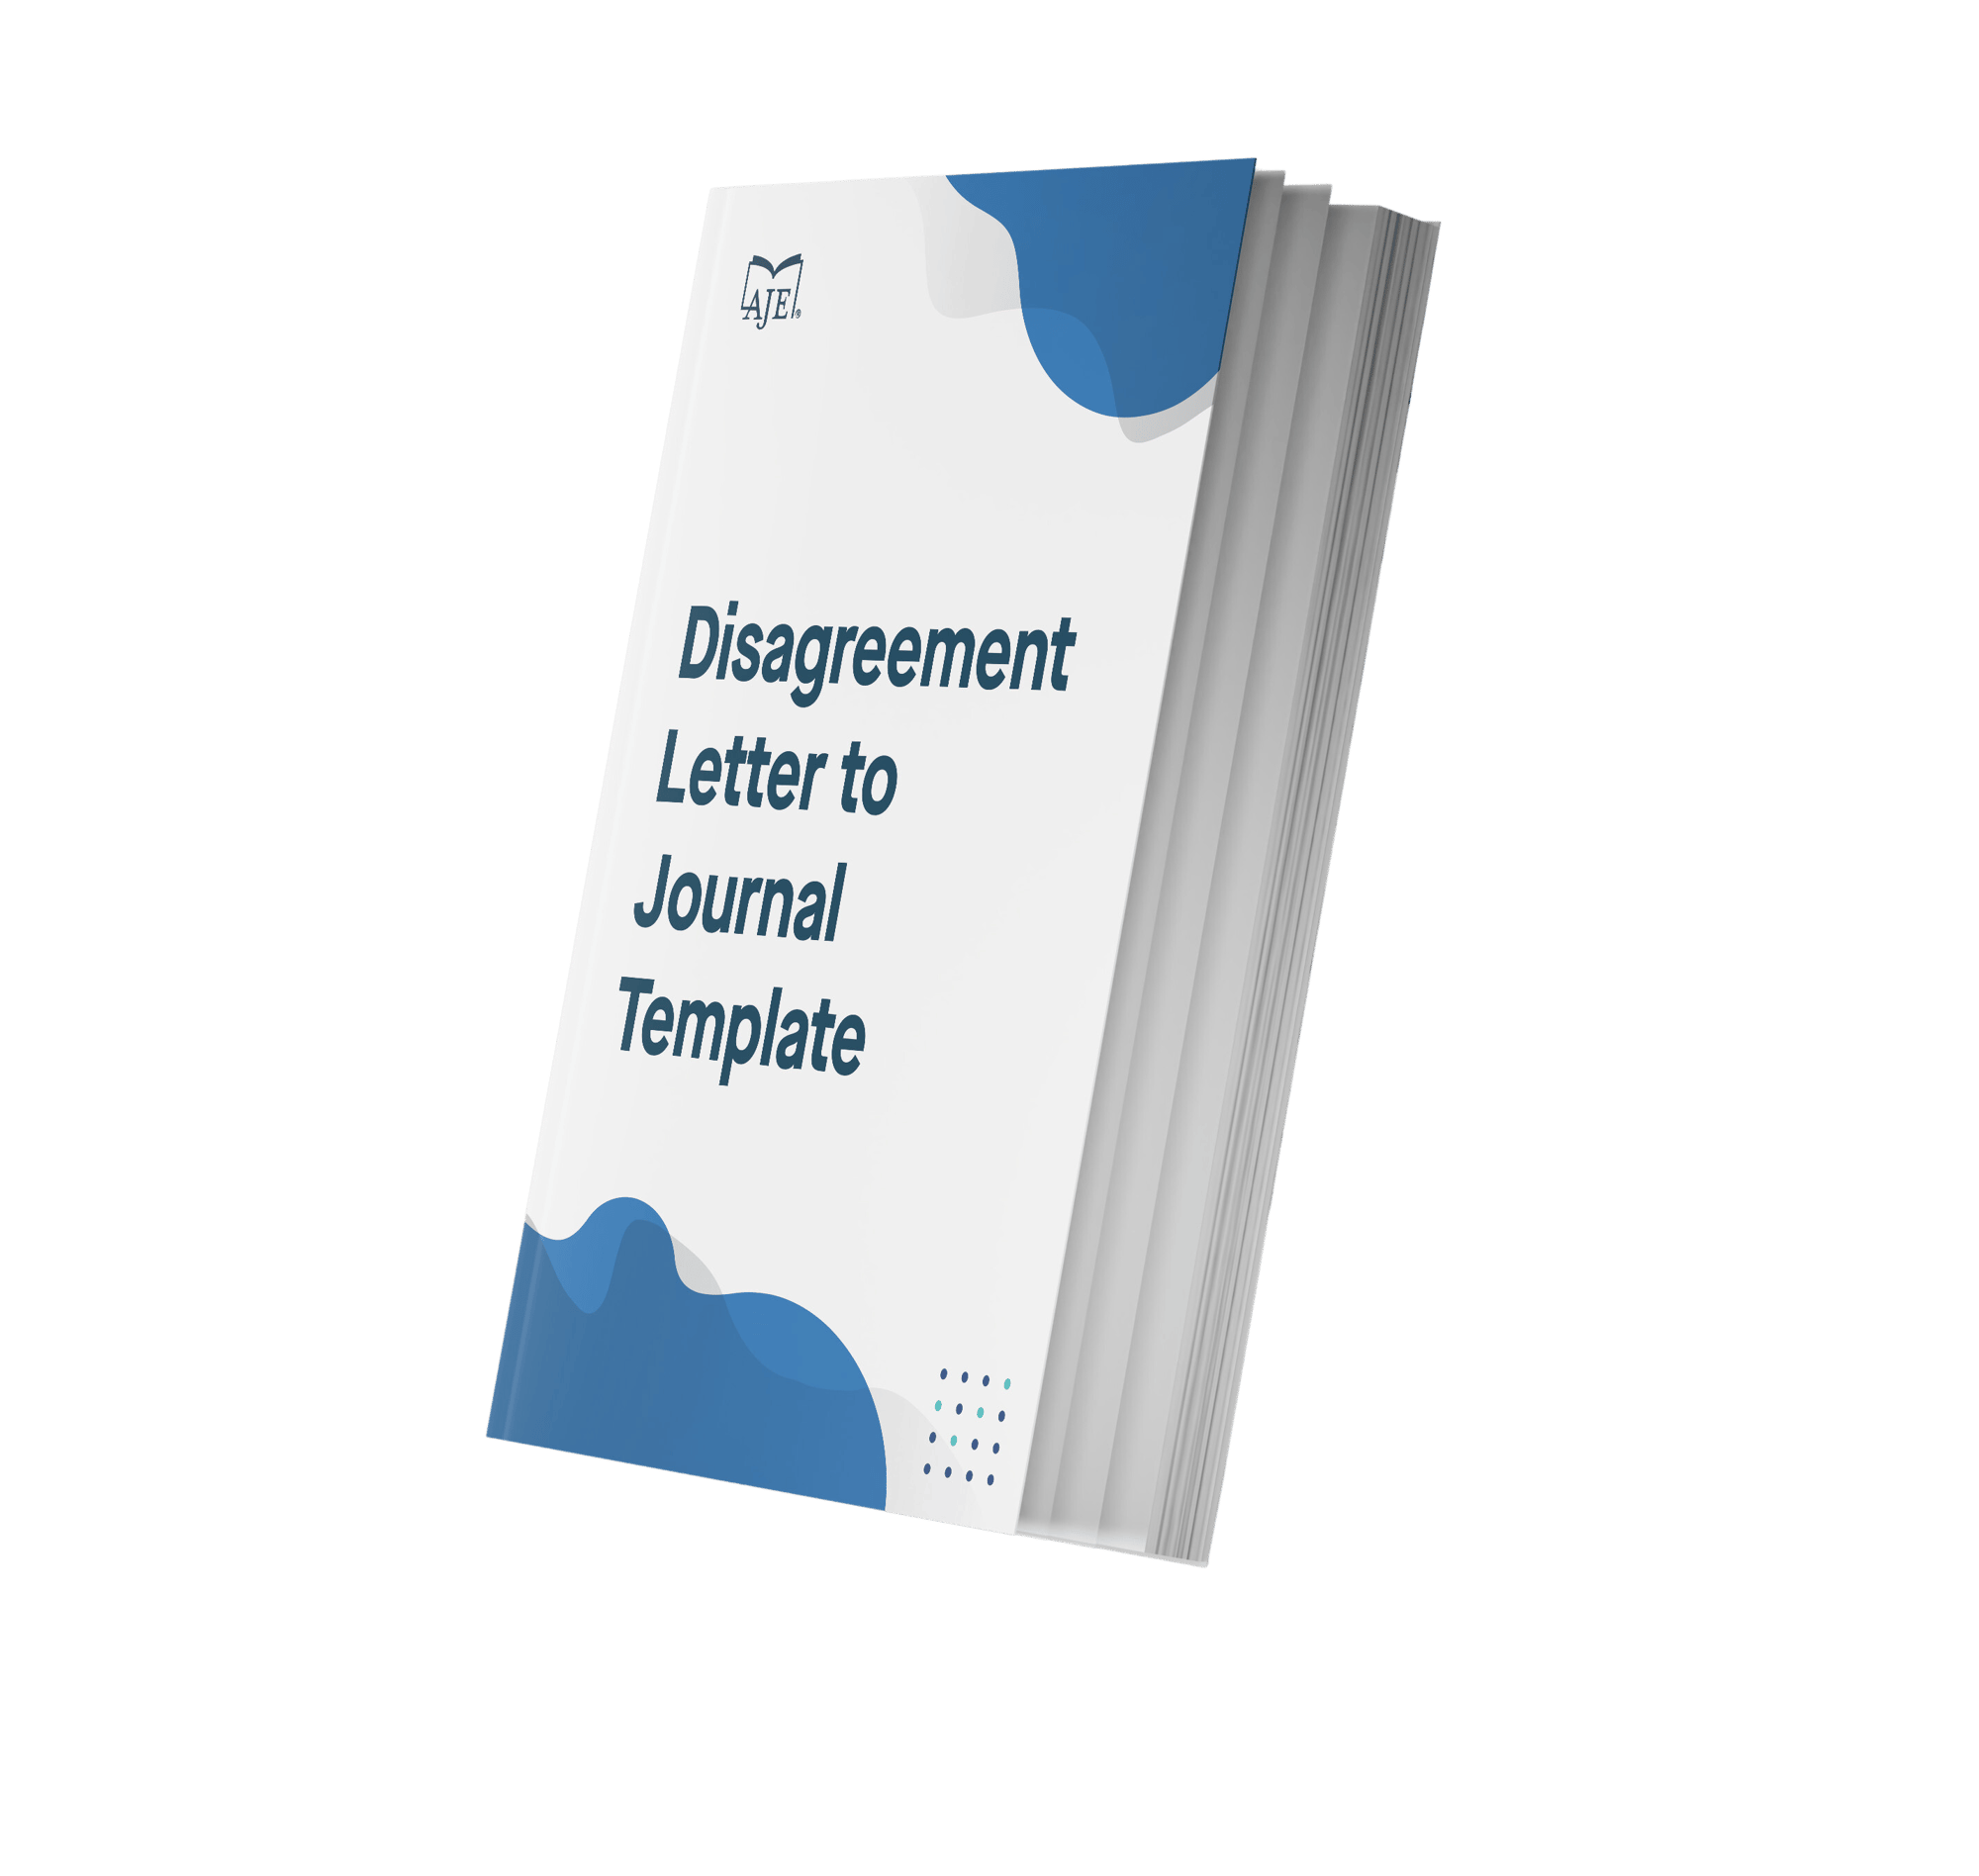 Disagreement Letter to Journal Template - no shadow